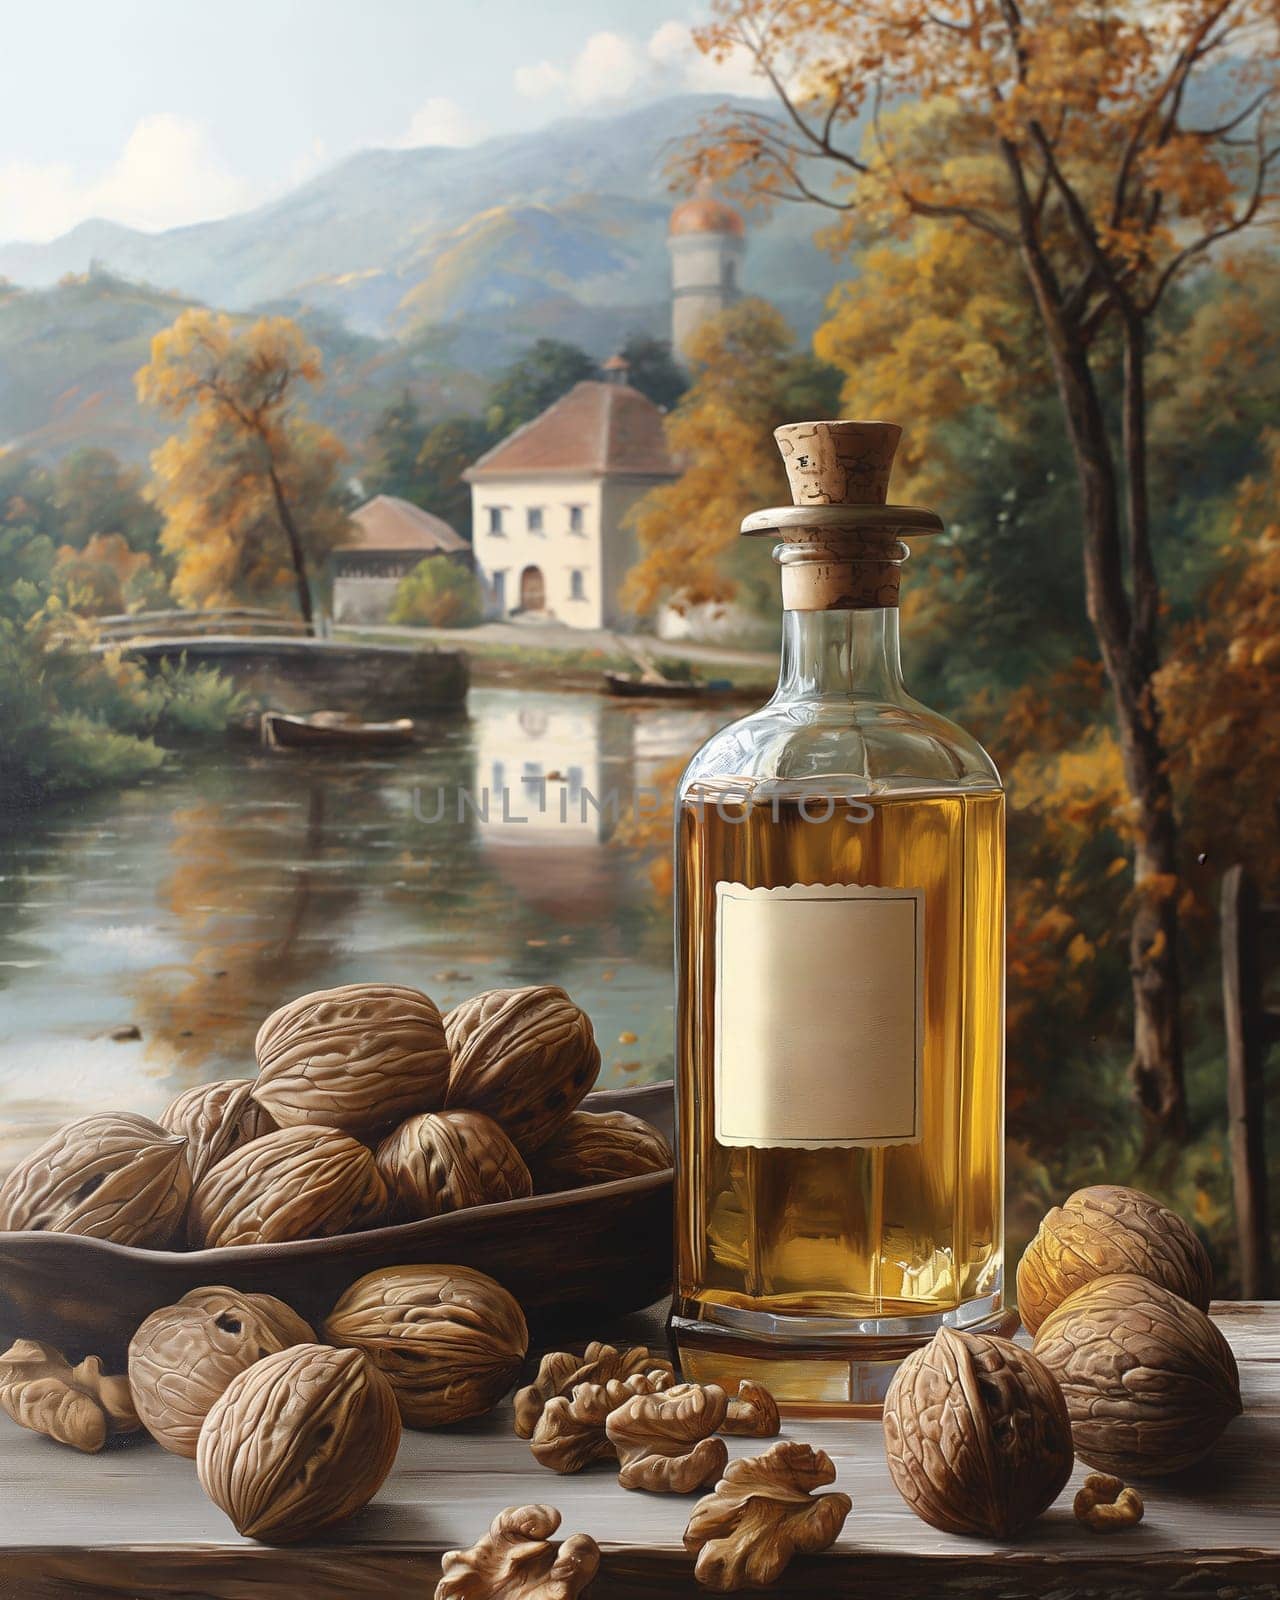 A bottle of oil and walnuts on a wooden table. by Fischeron